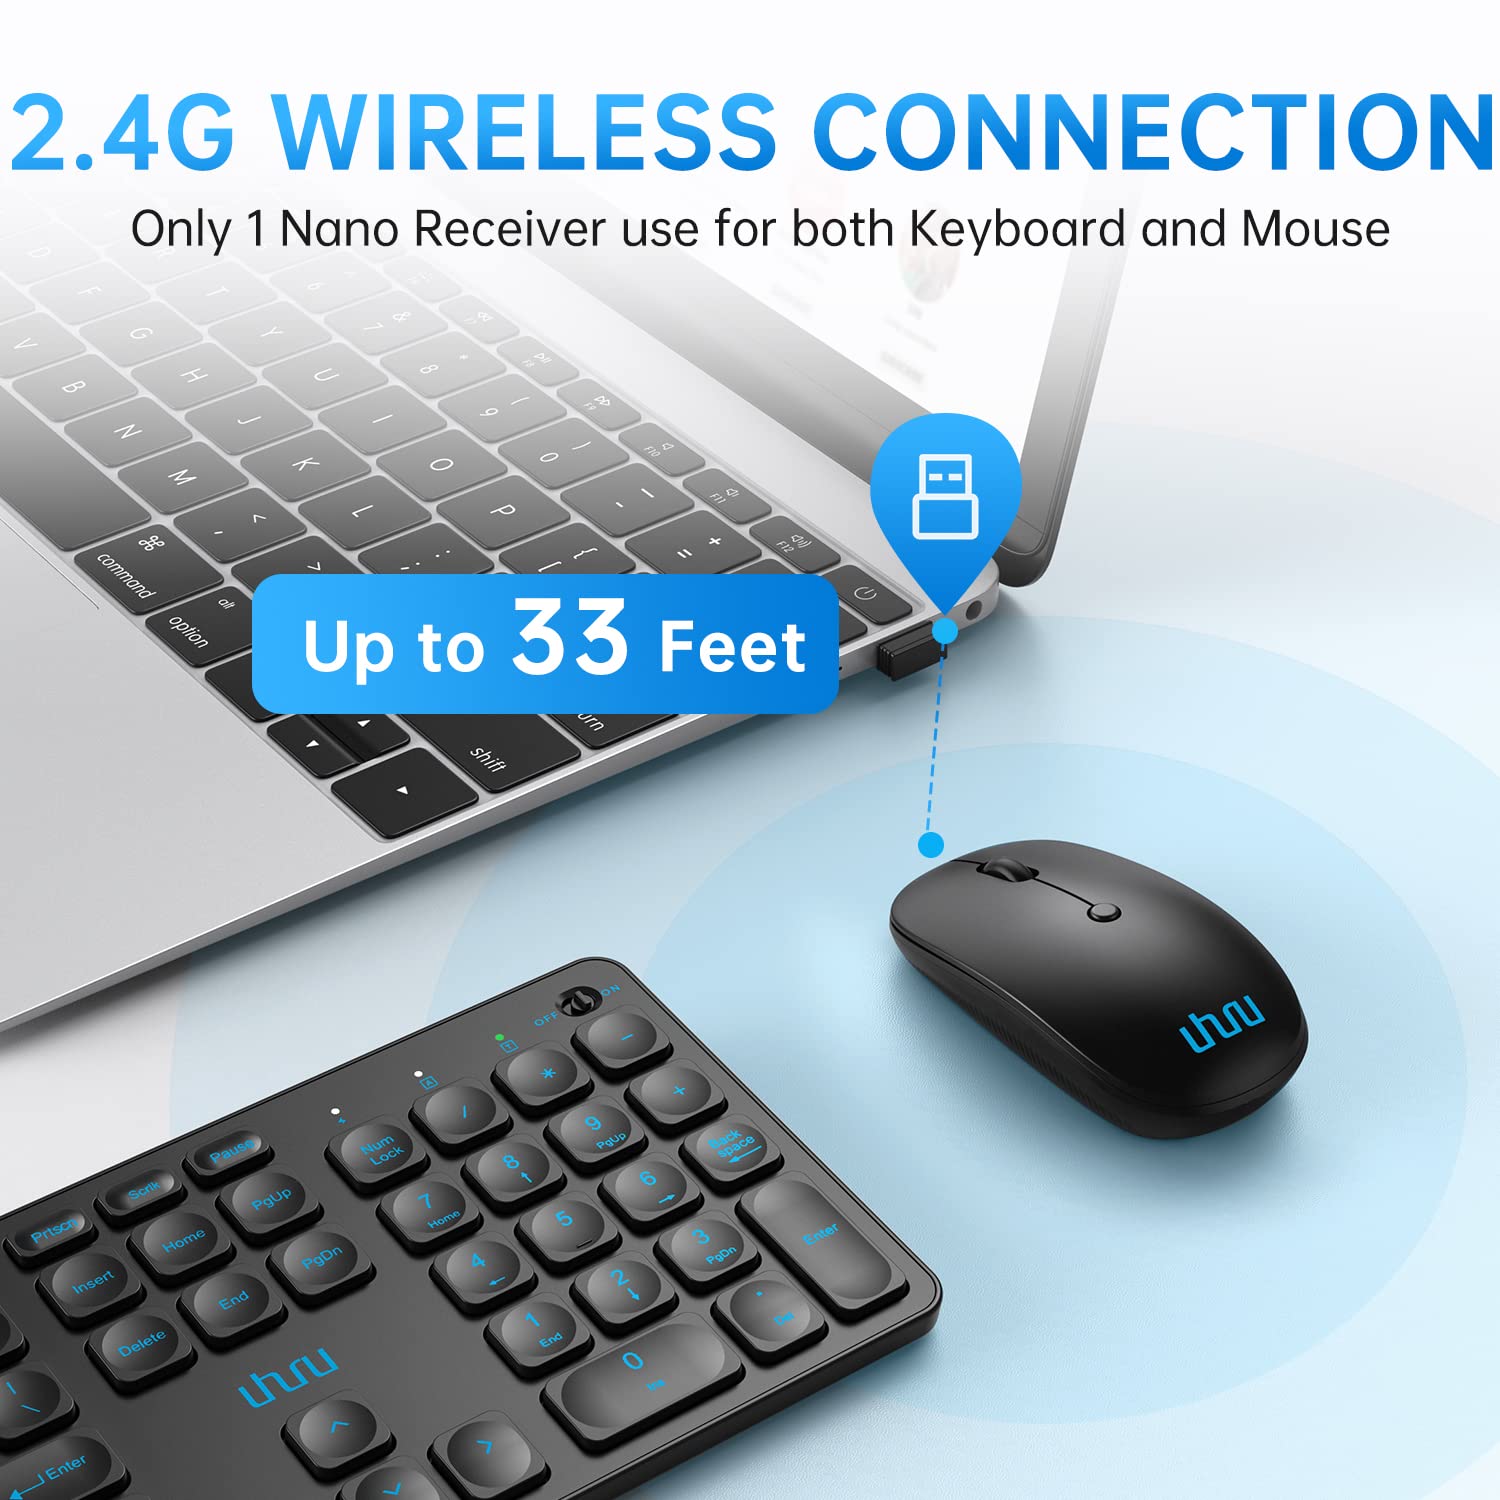 Rechargeable Wireless Keyboard and Mouse Combo, UHURU 2.4G Cordless Keyboard Mouse, Ultra-Thin Keyboard,3 Level DPI Mouse, Energy-Saving Keyboard Mice, Compatible with Windows/Mac OS/Laptop/PC